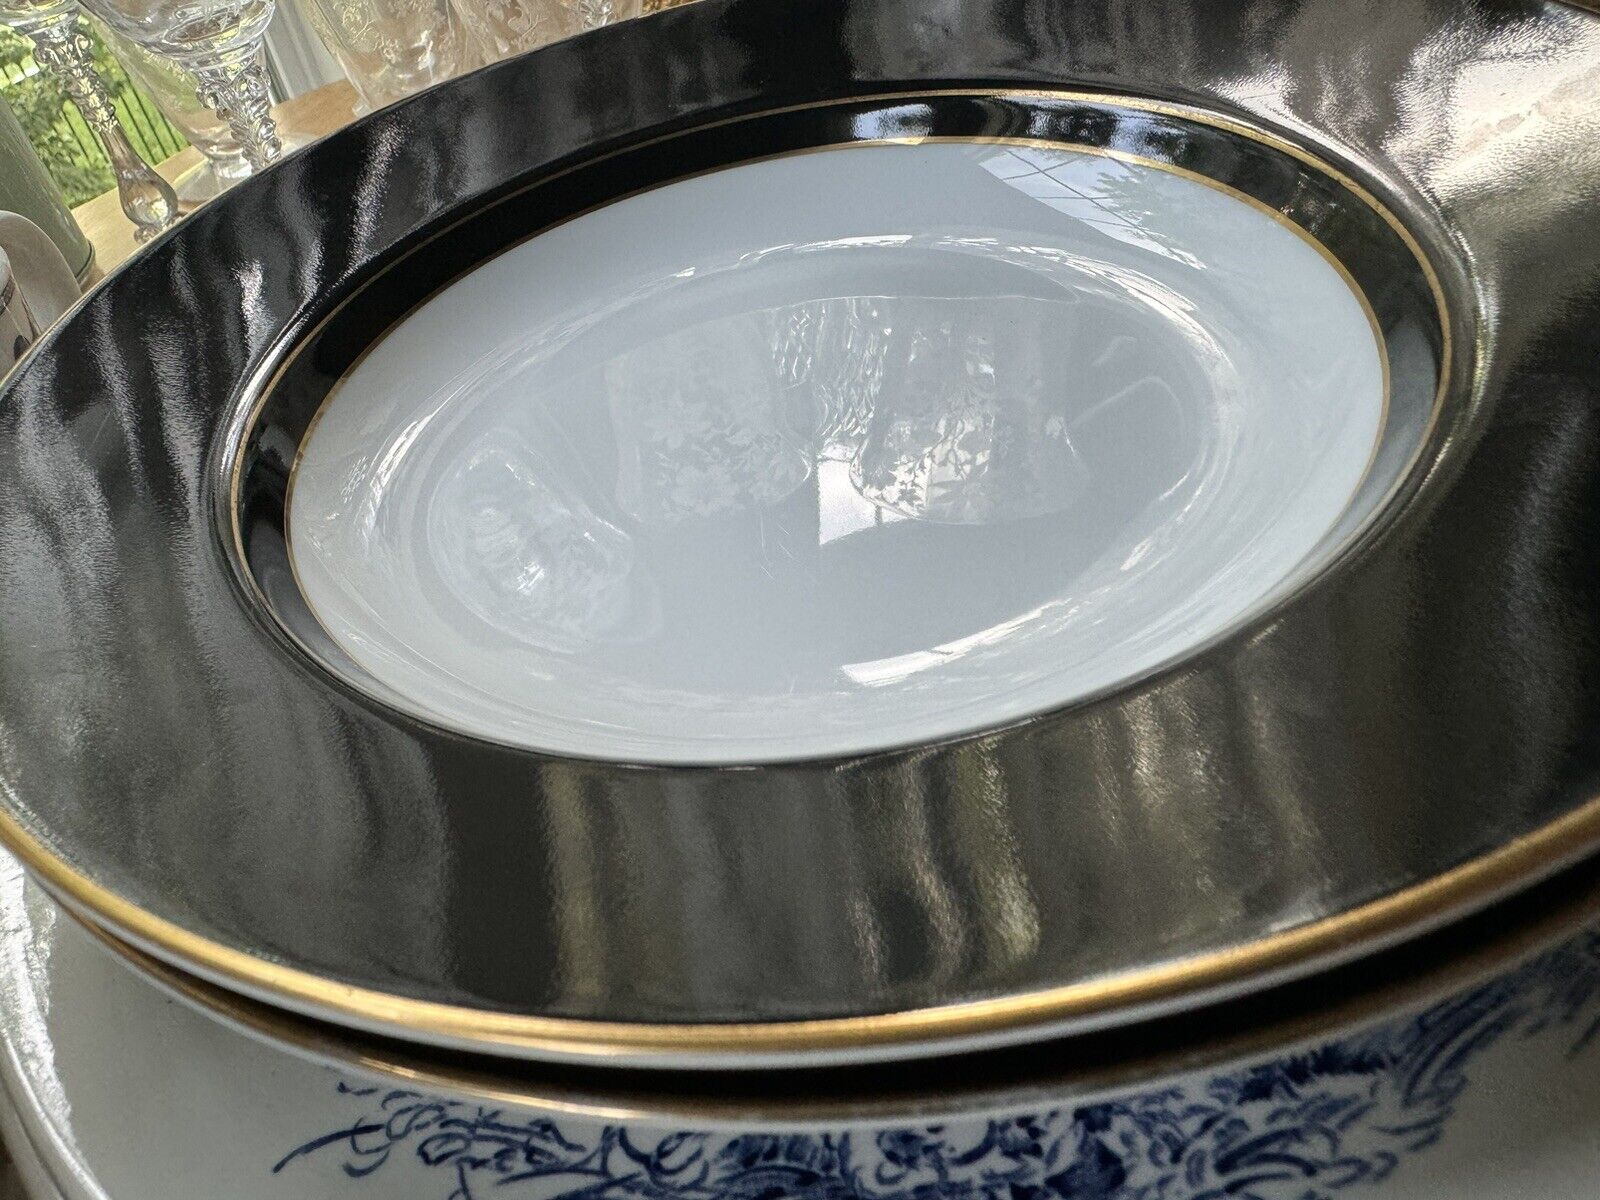 Set of 2 Fitz & Floyd Chinoiserie Black Rimmed W/Gold Soup Bowls Elegant Classic